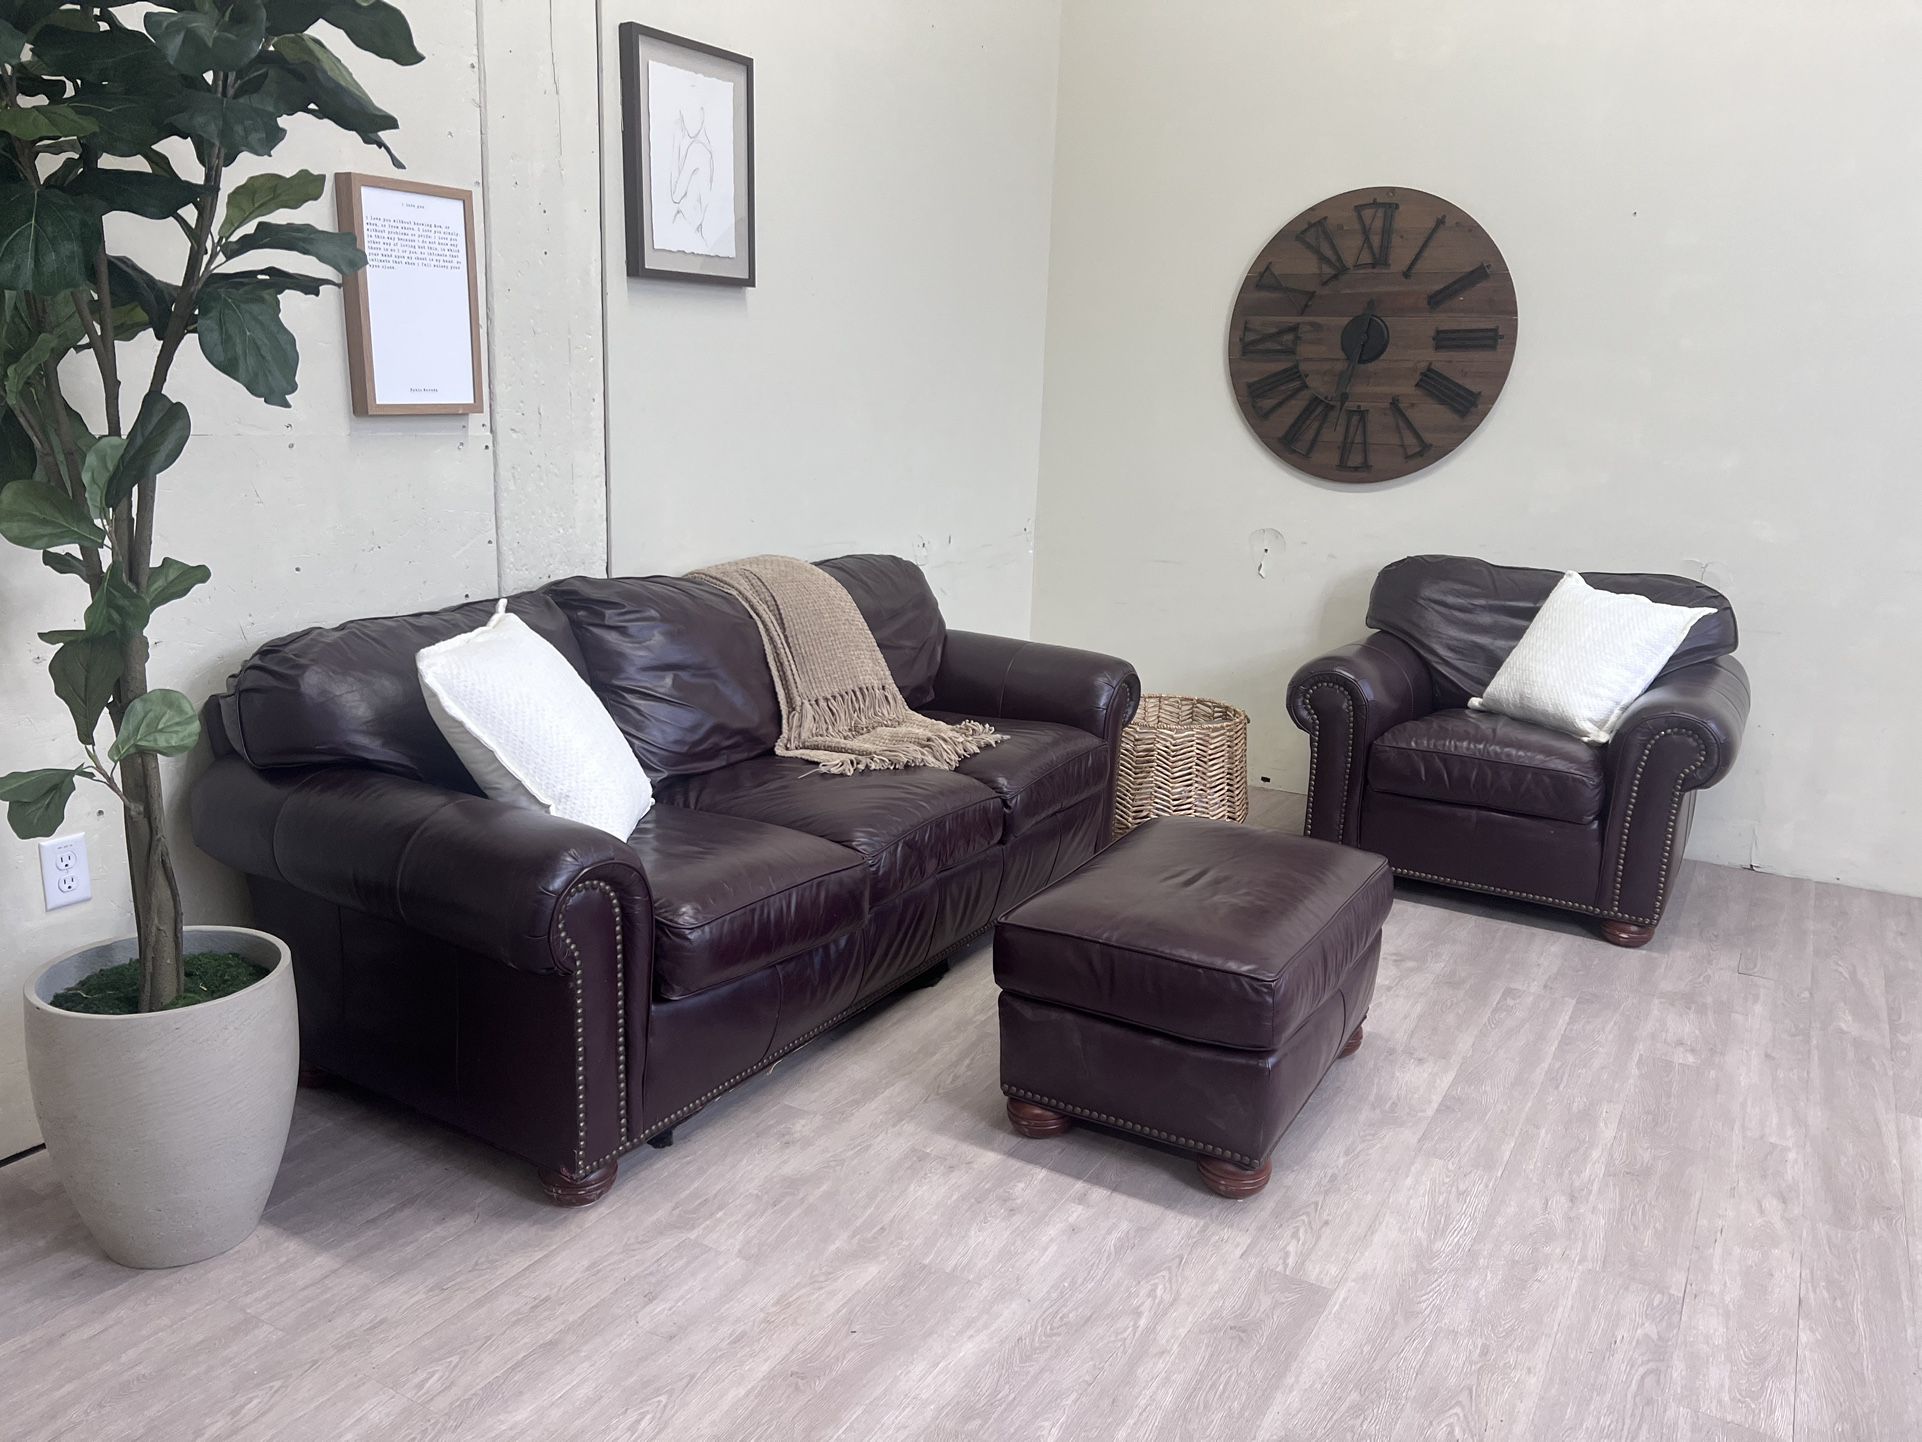 FREE DELIVERY! 🚚 - Dark Maroon Genuine Leather Studded 3 Seater Couch Chair & Ottoman Set